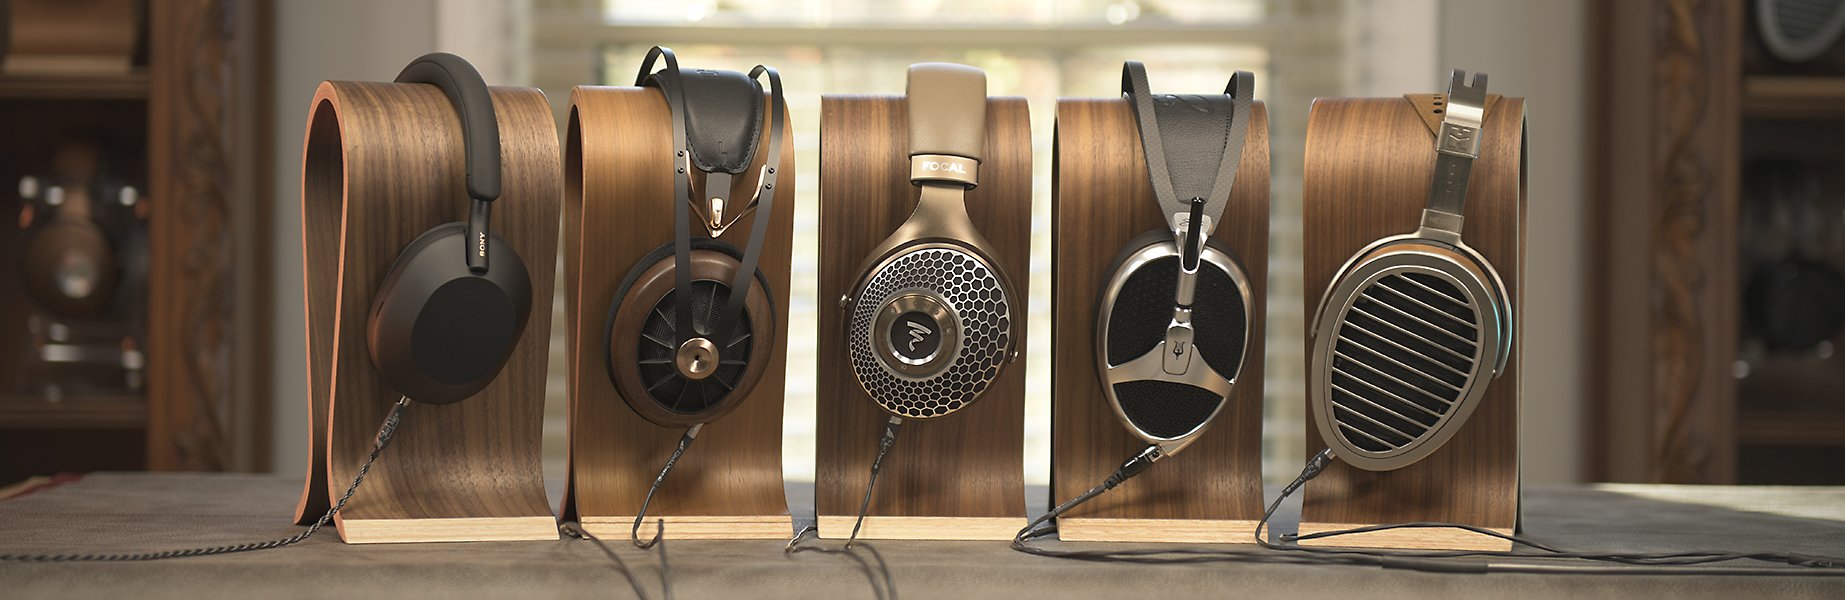 Audiophile Headphones by price point